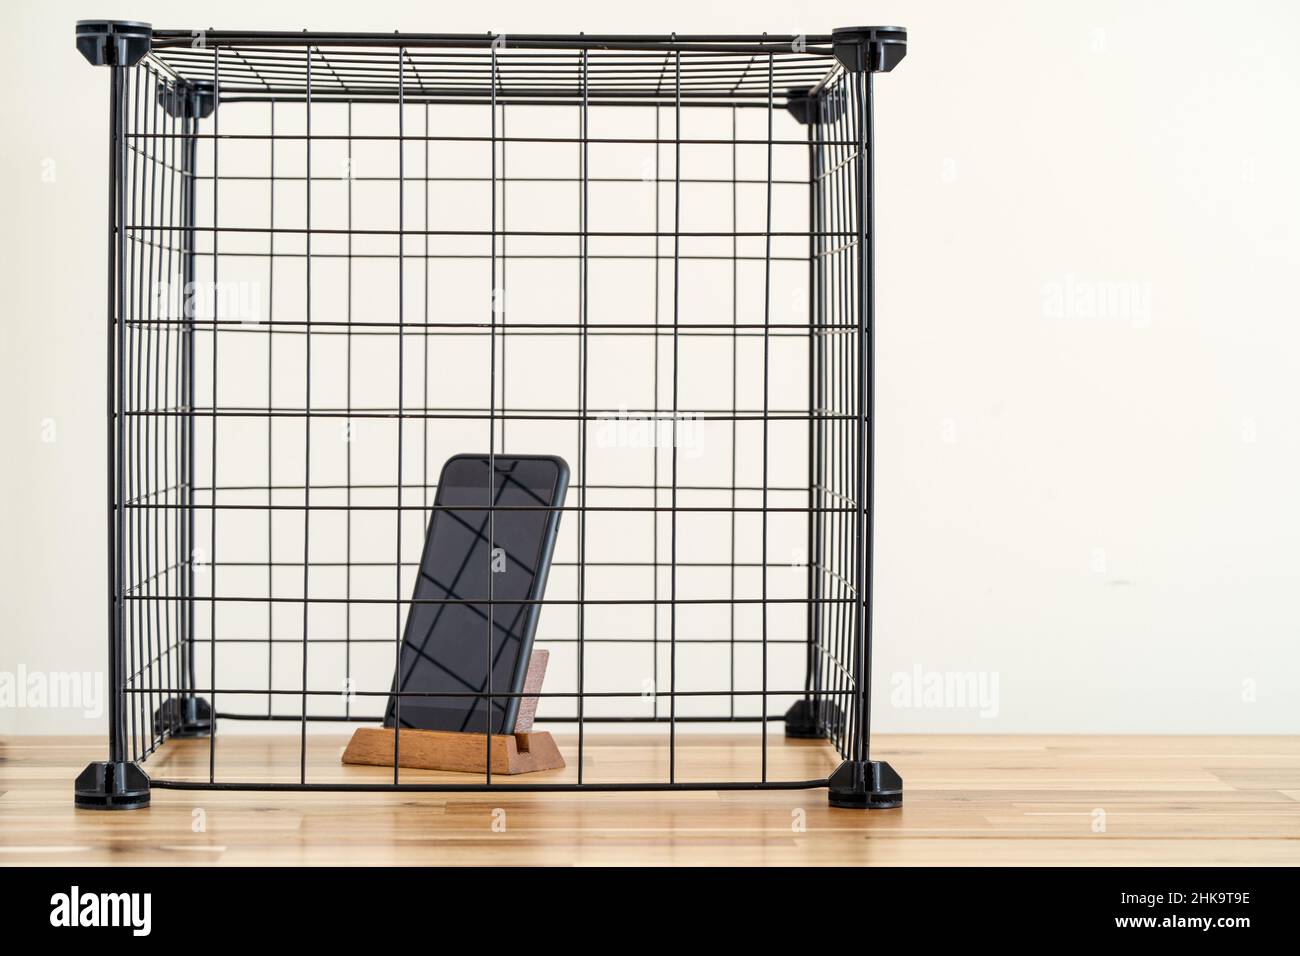 Smartphone standing inside the cage. concept of social media and internet detox. Stock Photo